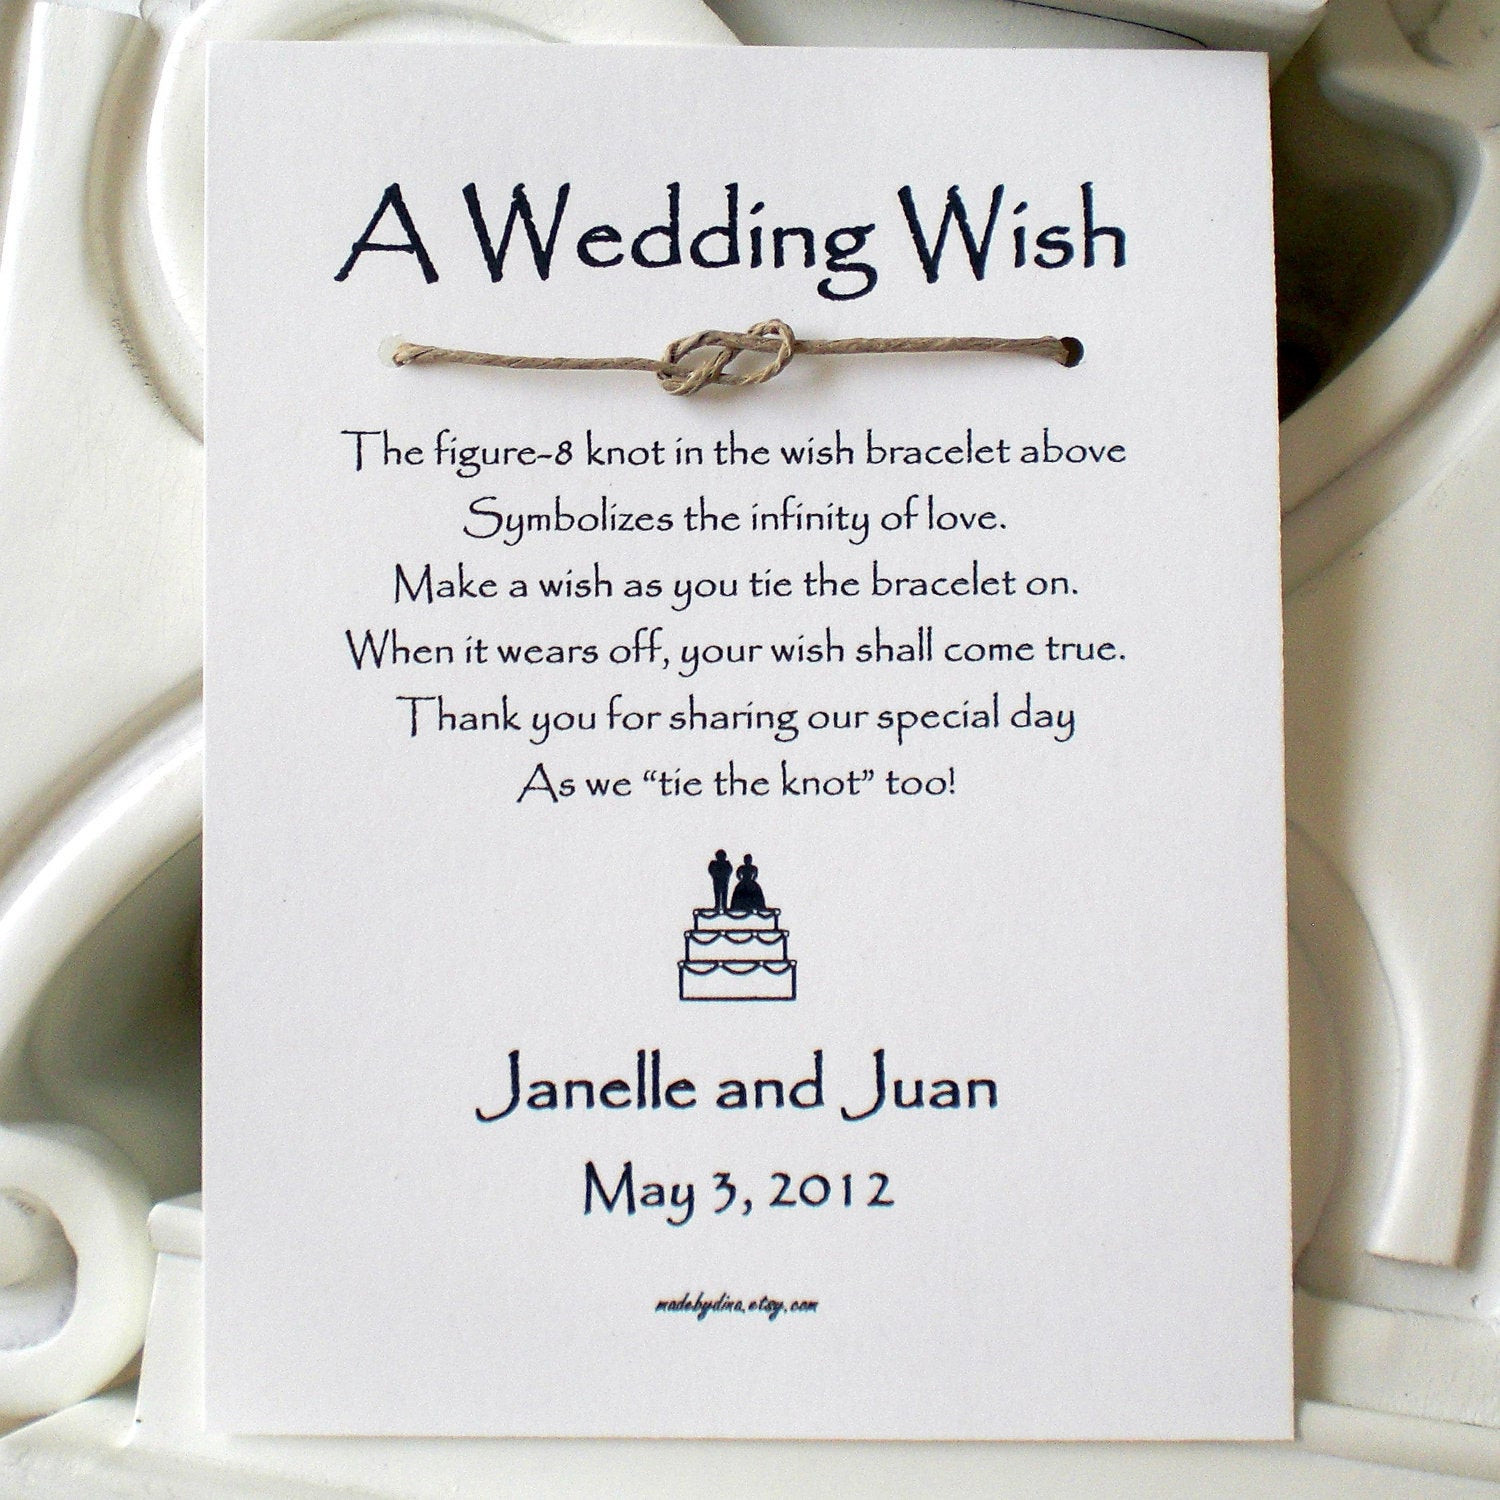 Funny Wedding Quotes For A Card
 Infinity Love Knot A Wedding Wish with Bride and Groom on a